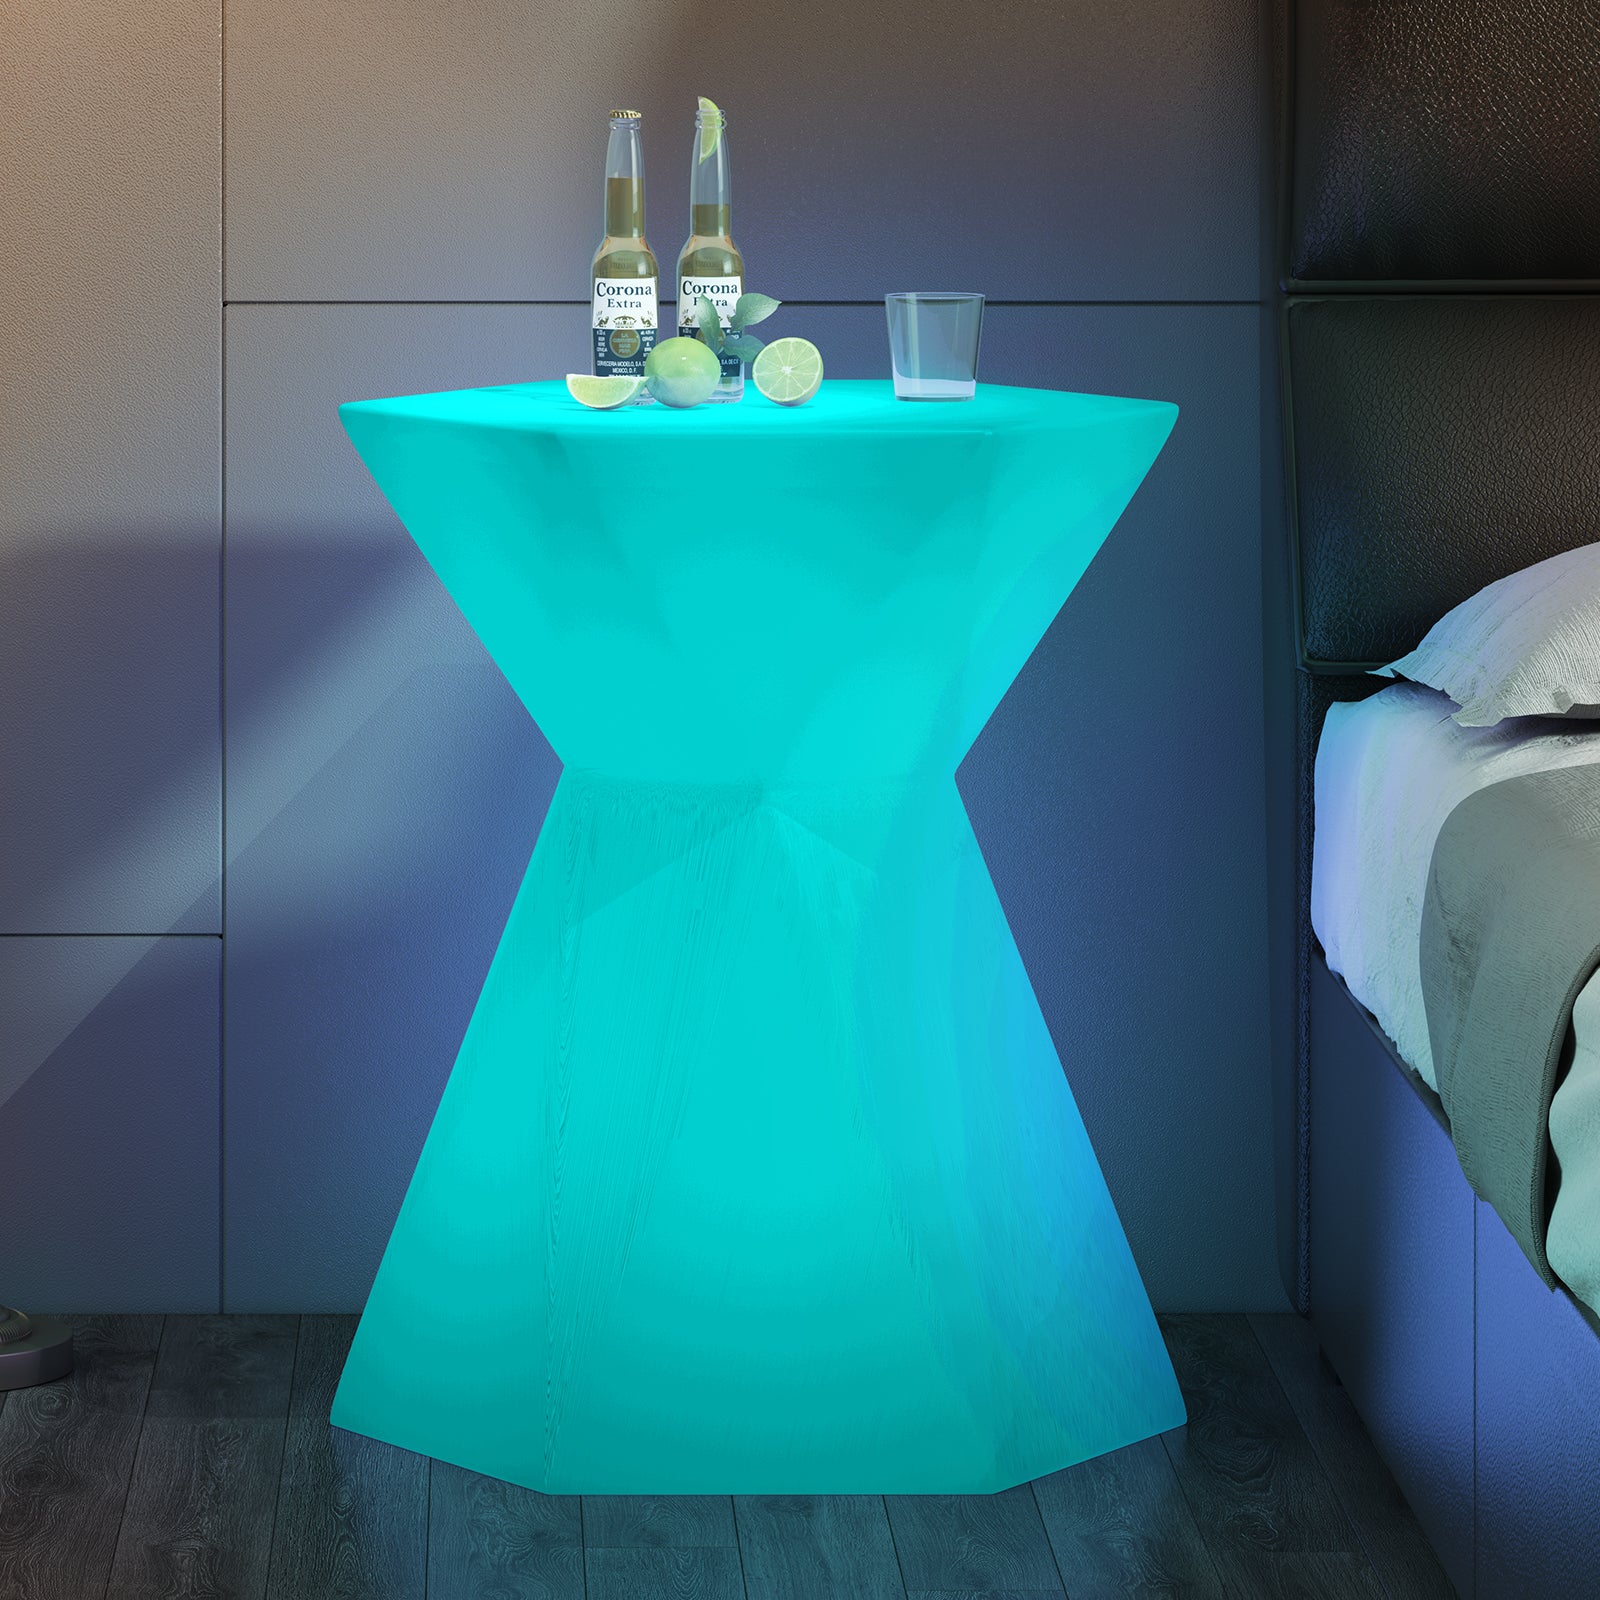 Cecer Changing Colors LED Cocktail Table with Slim Waist, 20" Light Up Wine Table Cordless LED Cocktail Table, Rechargeable Light Up Pub Table for Party, Home Patio Pool Ambiance LED Furniture